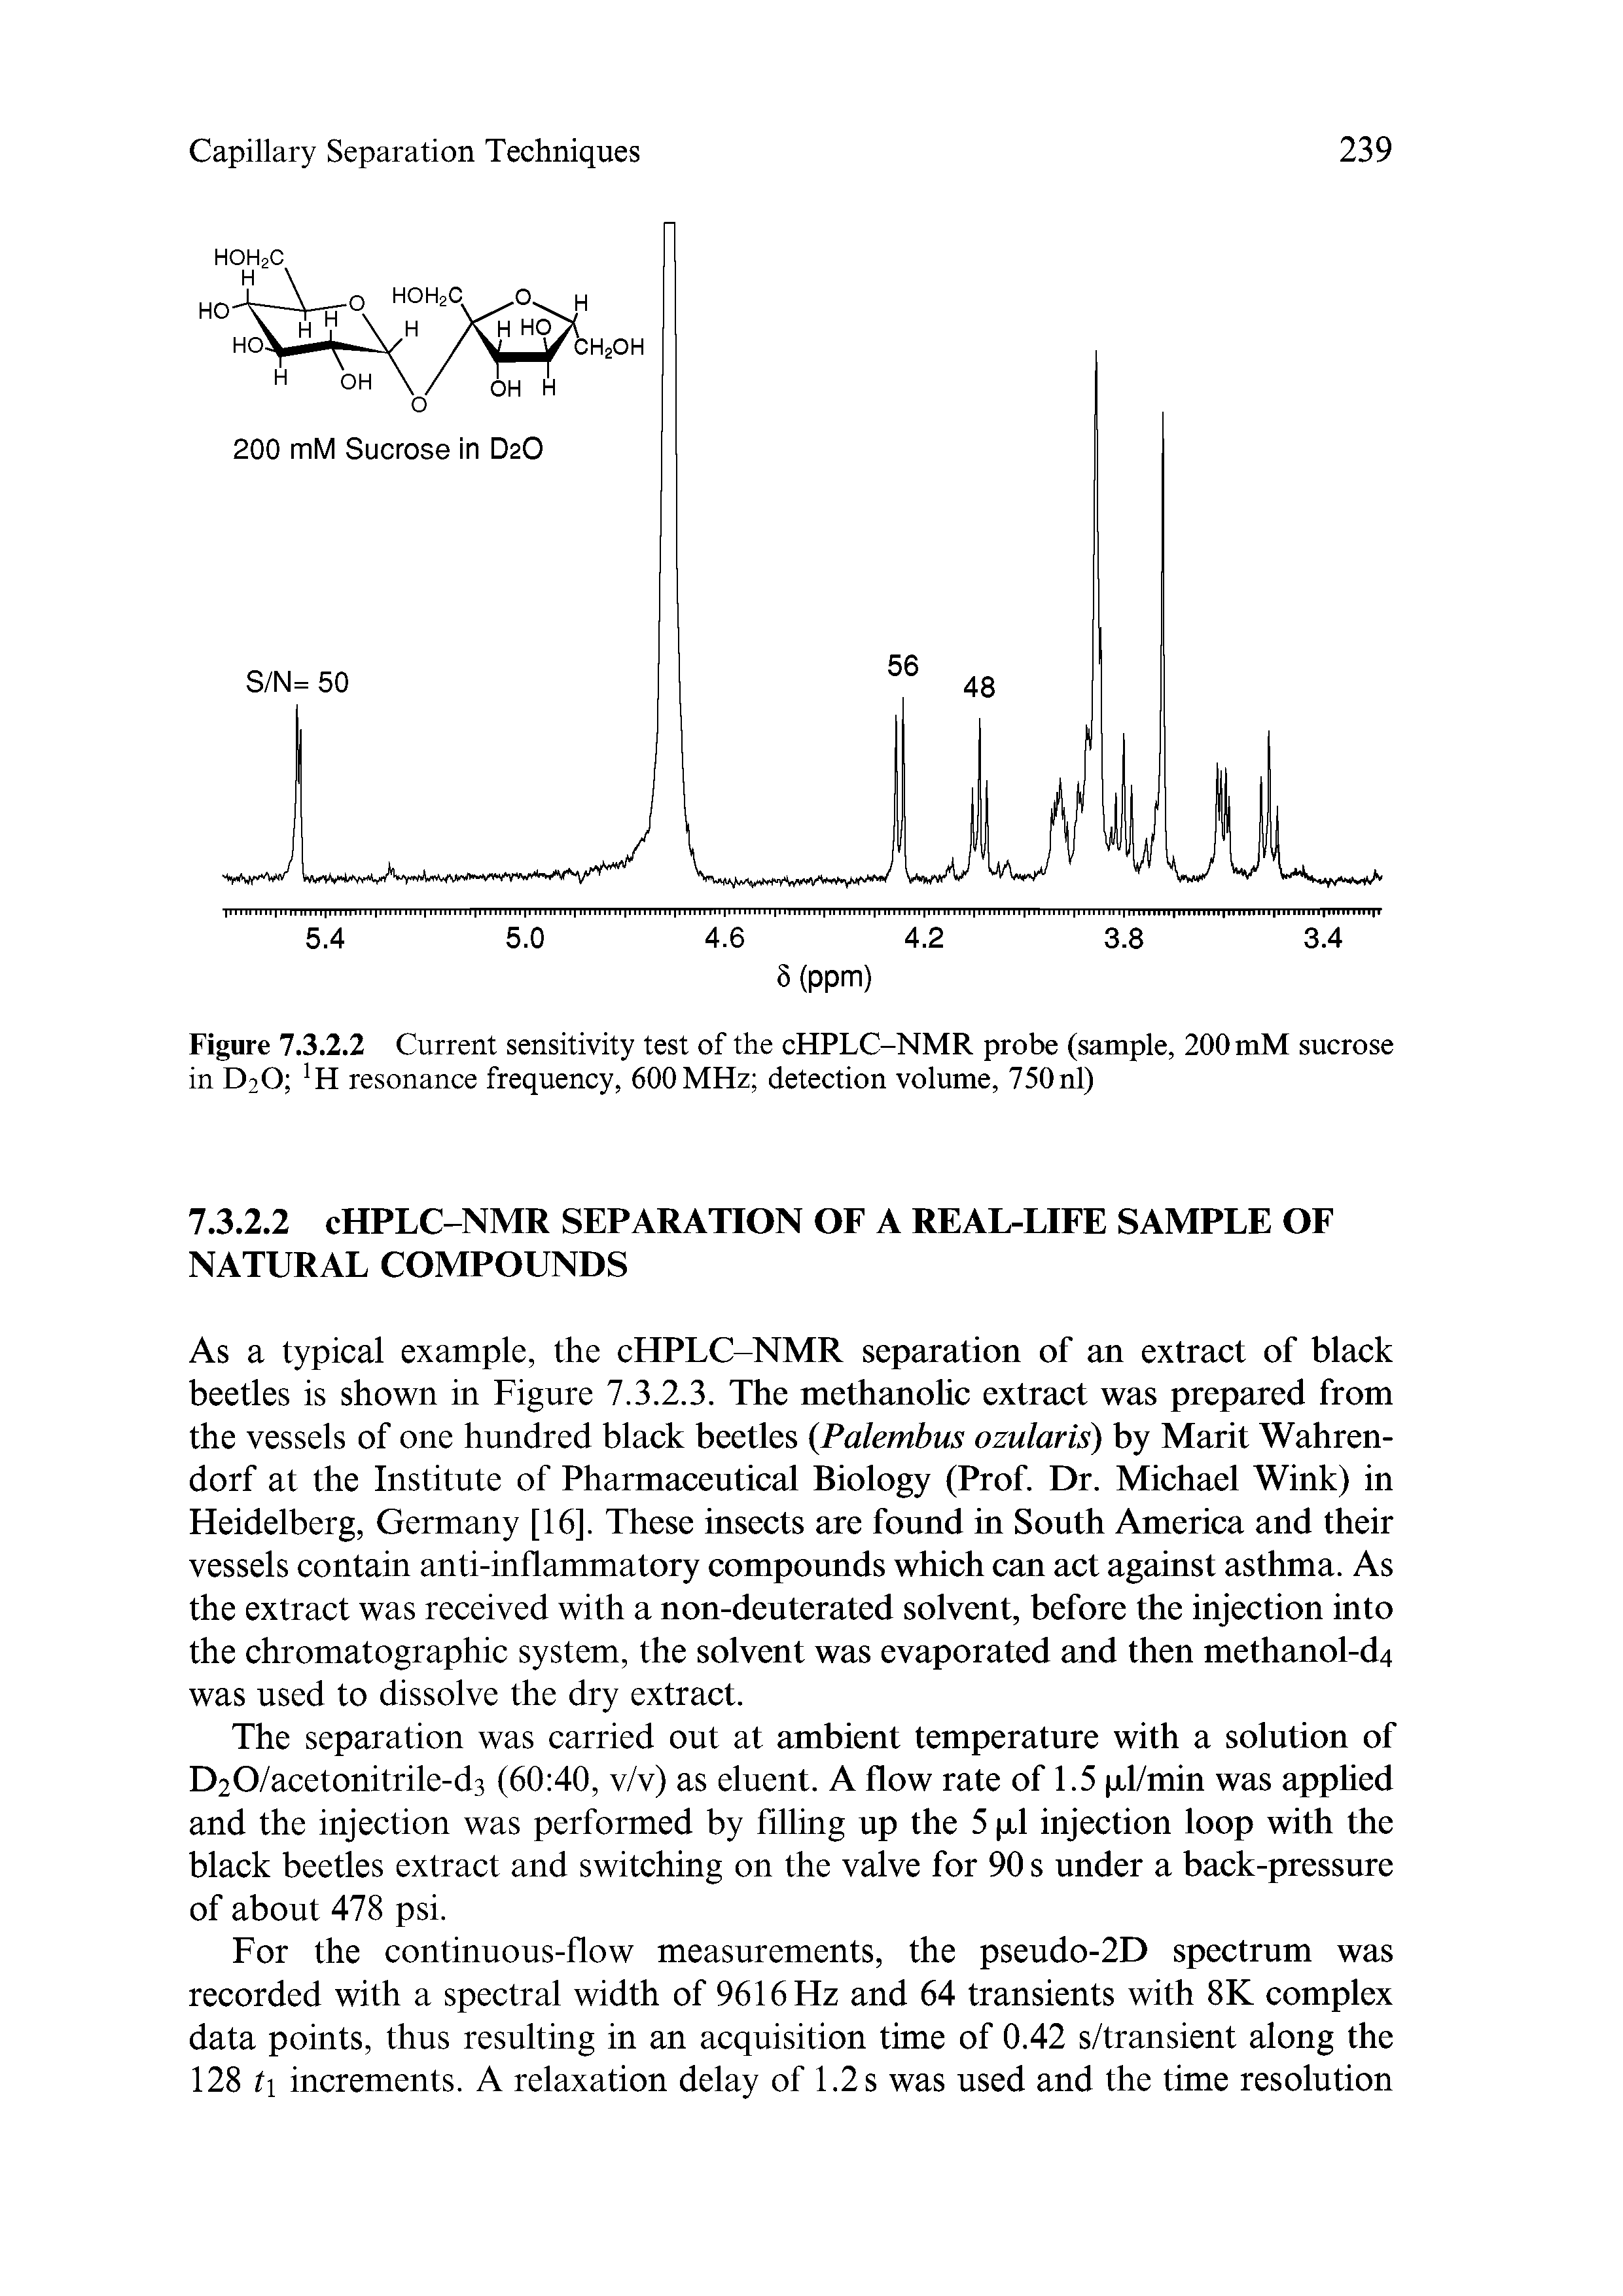 Figure 13.2.2 Current sensitivity test of the cHPLC-NMR probe (sample, 200 mM sucrose in D2O H resonance frequency, 600 MHz detection volume, 750 nl)...